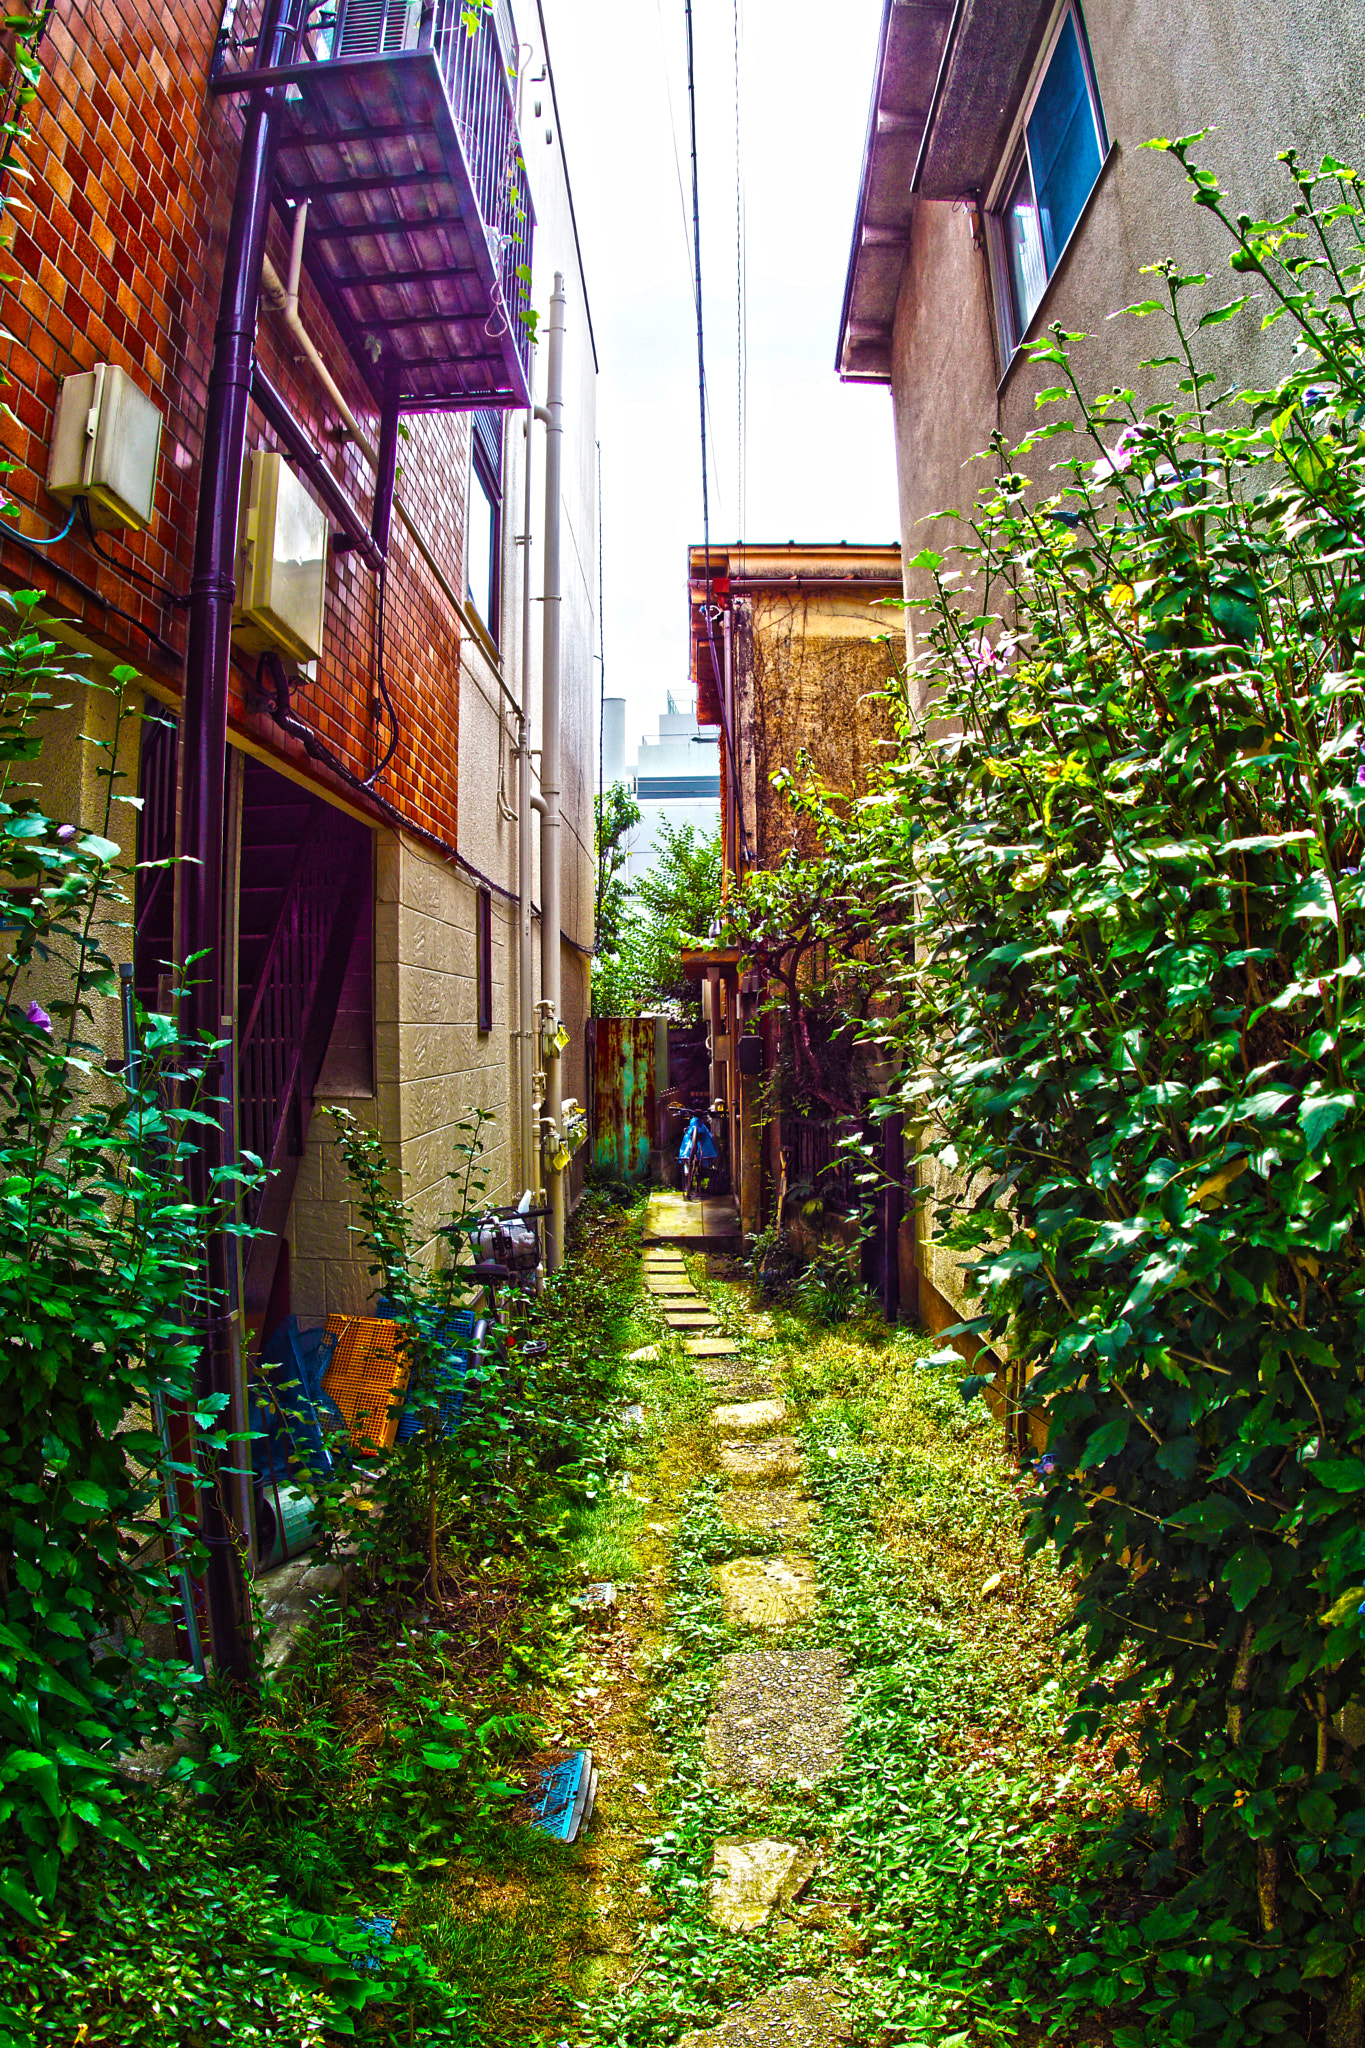 Back alley of the residential area